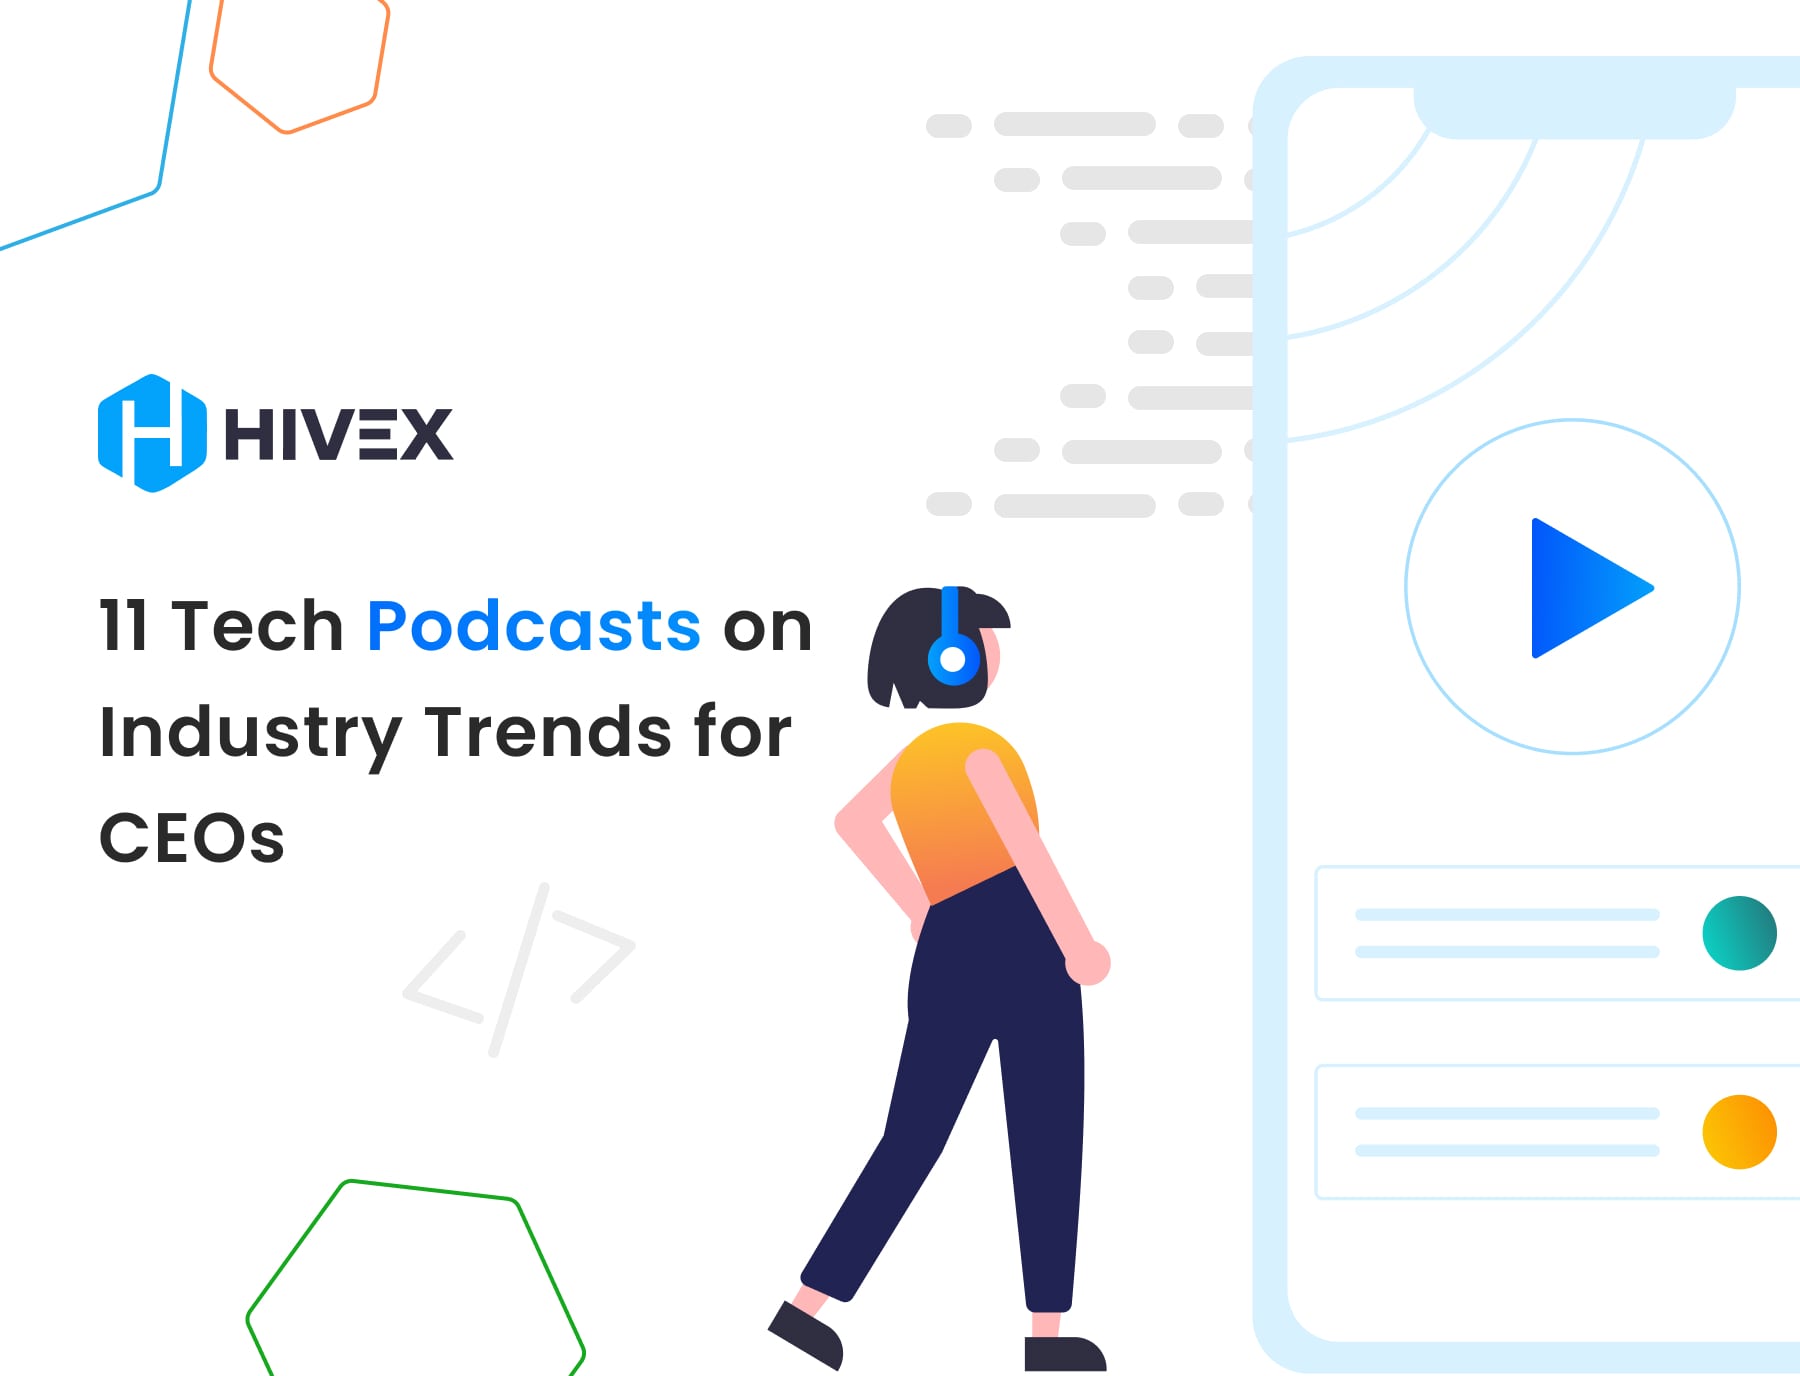 11 Tech Podcasts on Industry Trends for CEOs